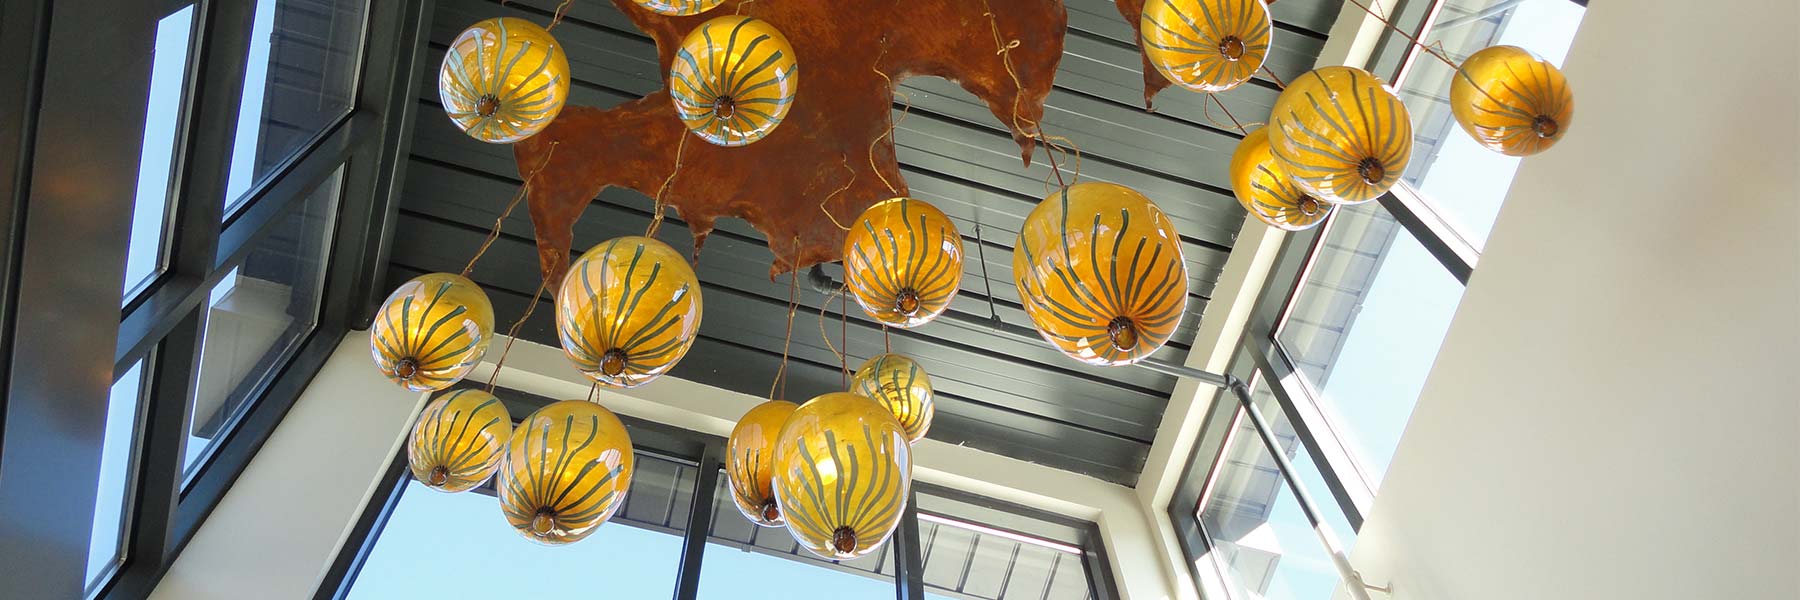 Photo of McElwee's glass art at The Porch restaurant.